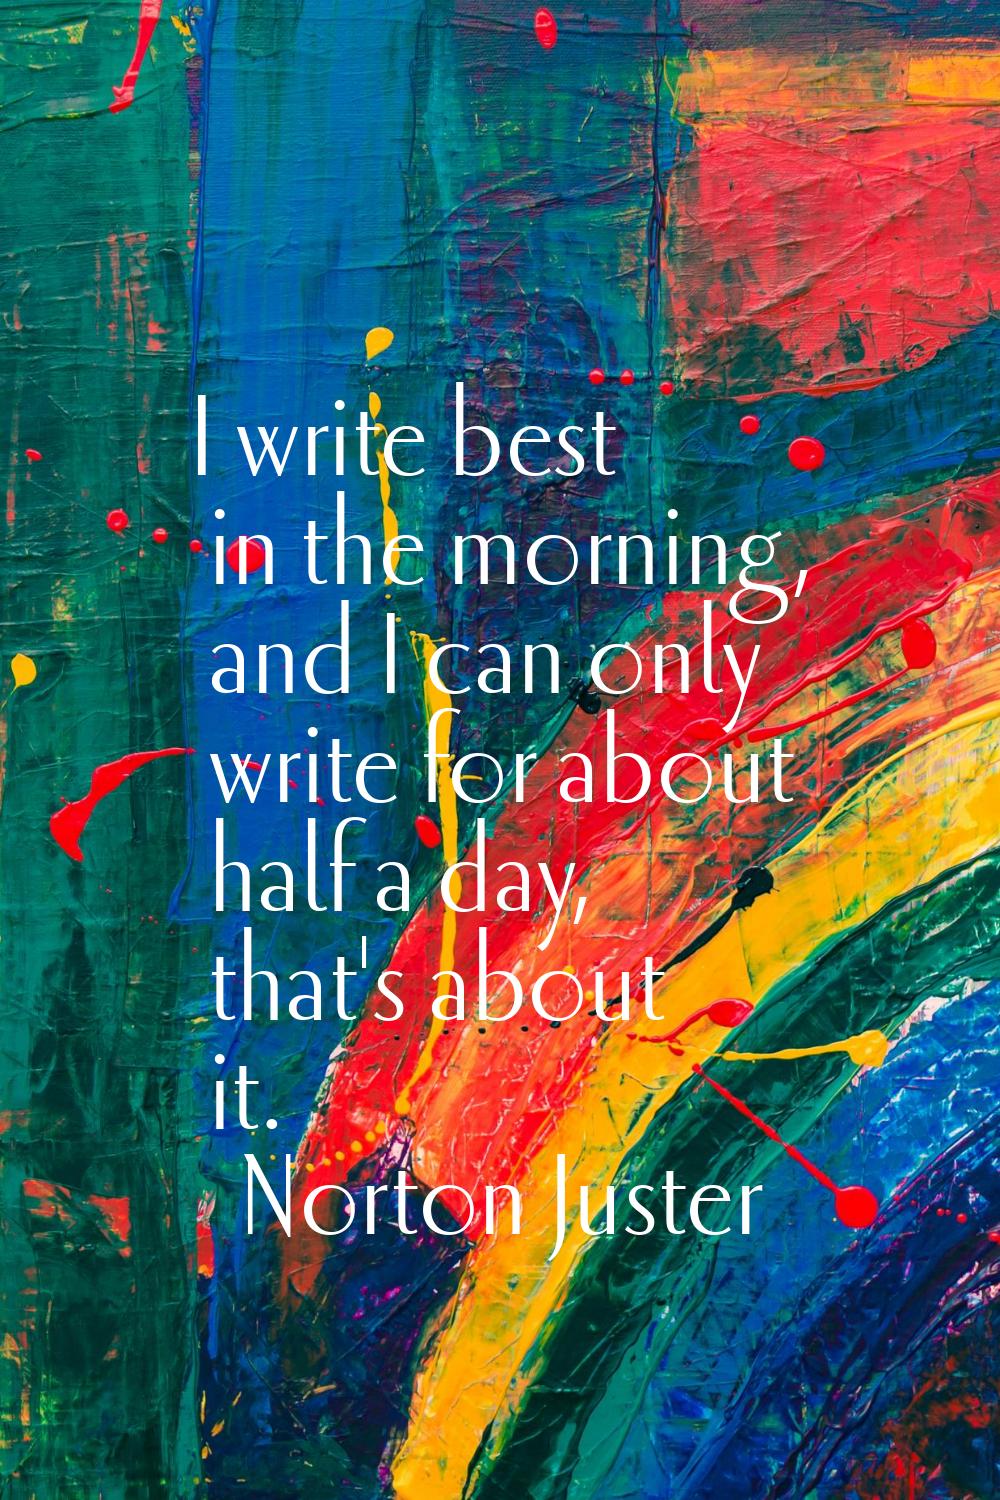 I write best in the morning, and I can only write for about half a day, that's about it.